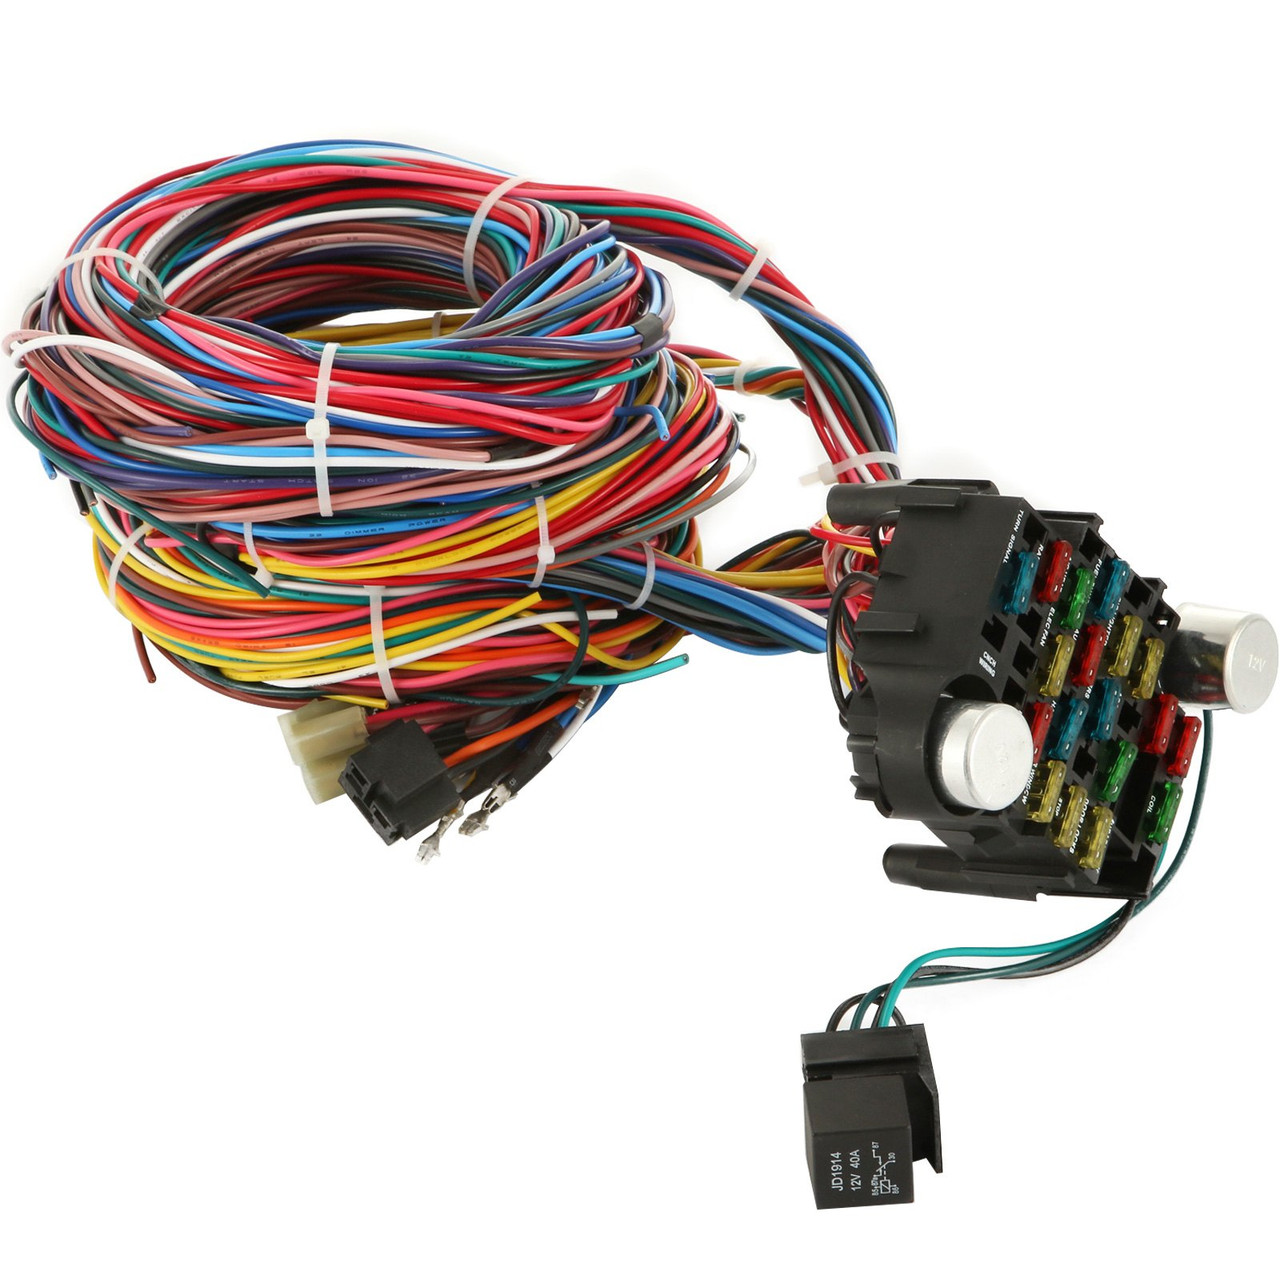 21 Circuit Wiring Harness Kit Long Wires Wiring Harness 21 standard Color Wiring Harness Kit with 21 Circuits 17 Fuses for Chevy Mopar Hotrods Ford Chrysler Universal